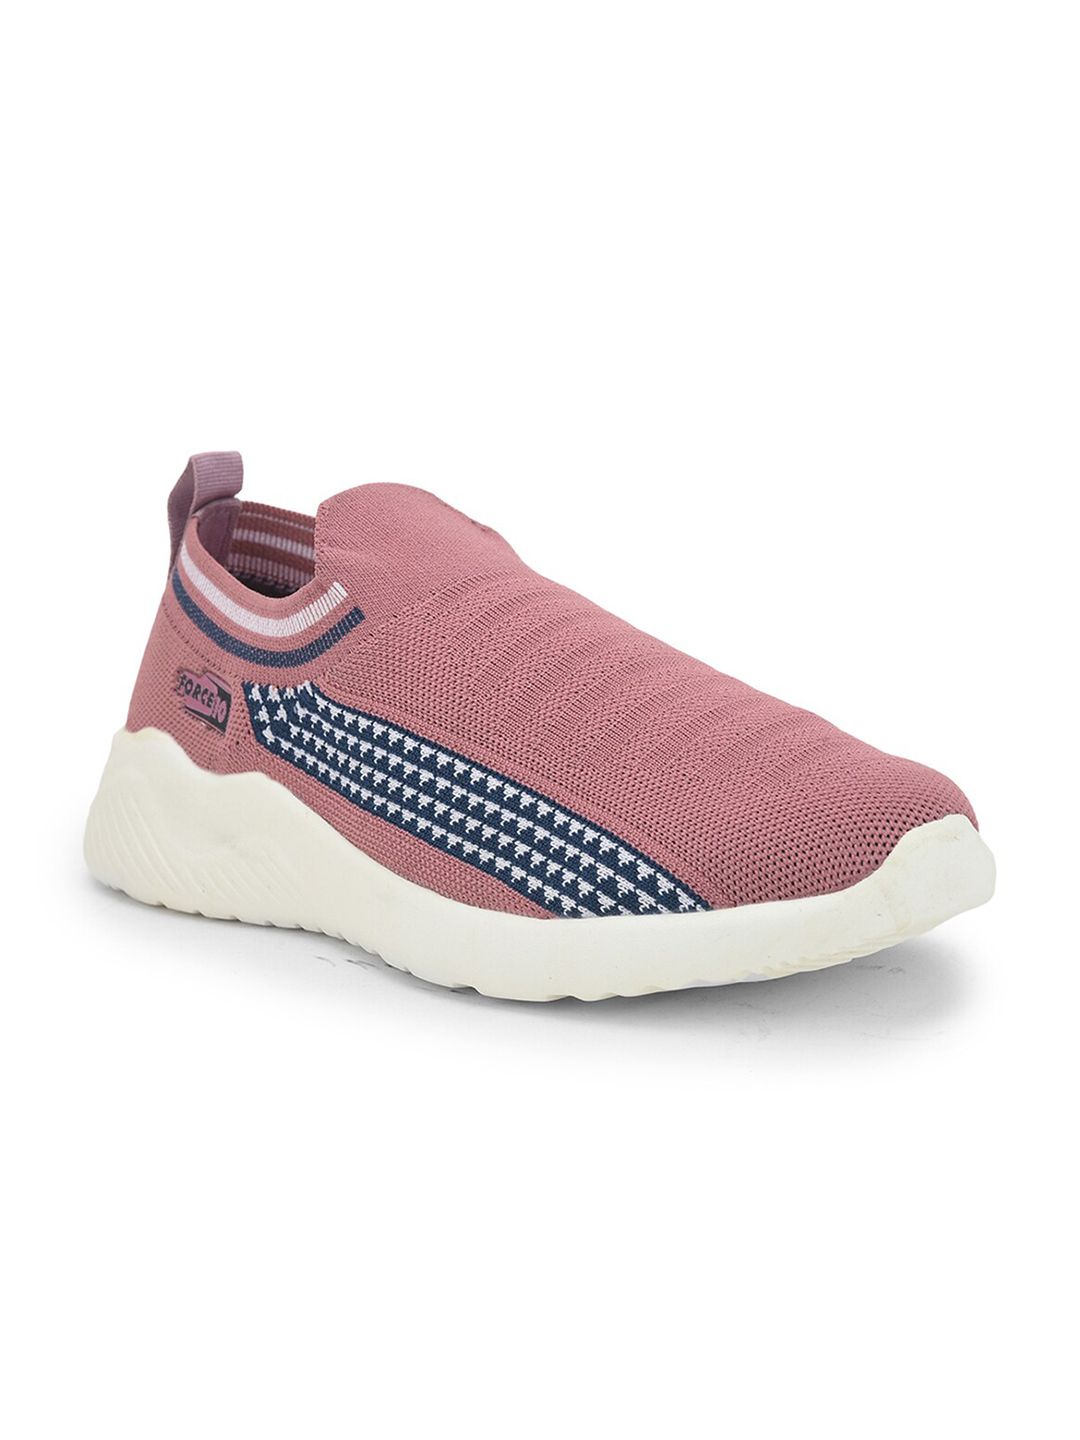 Liberty Women Pink Mesh Running Non-Marking Shoes Price in India